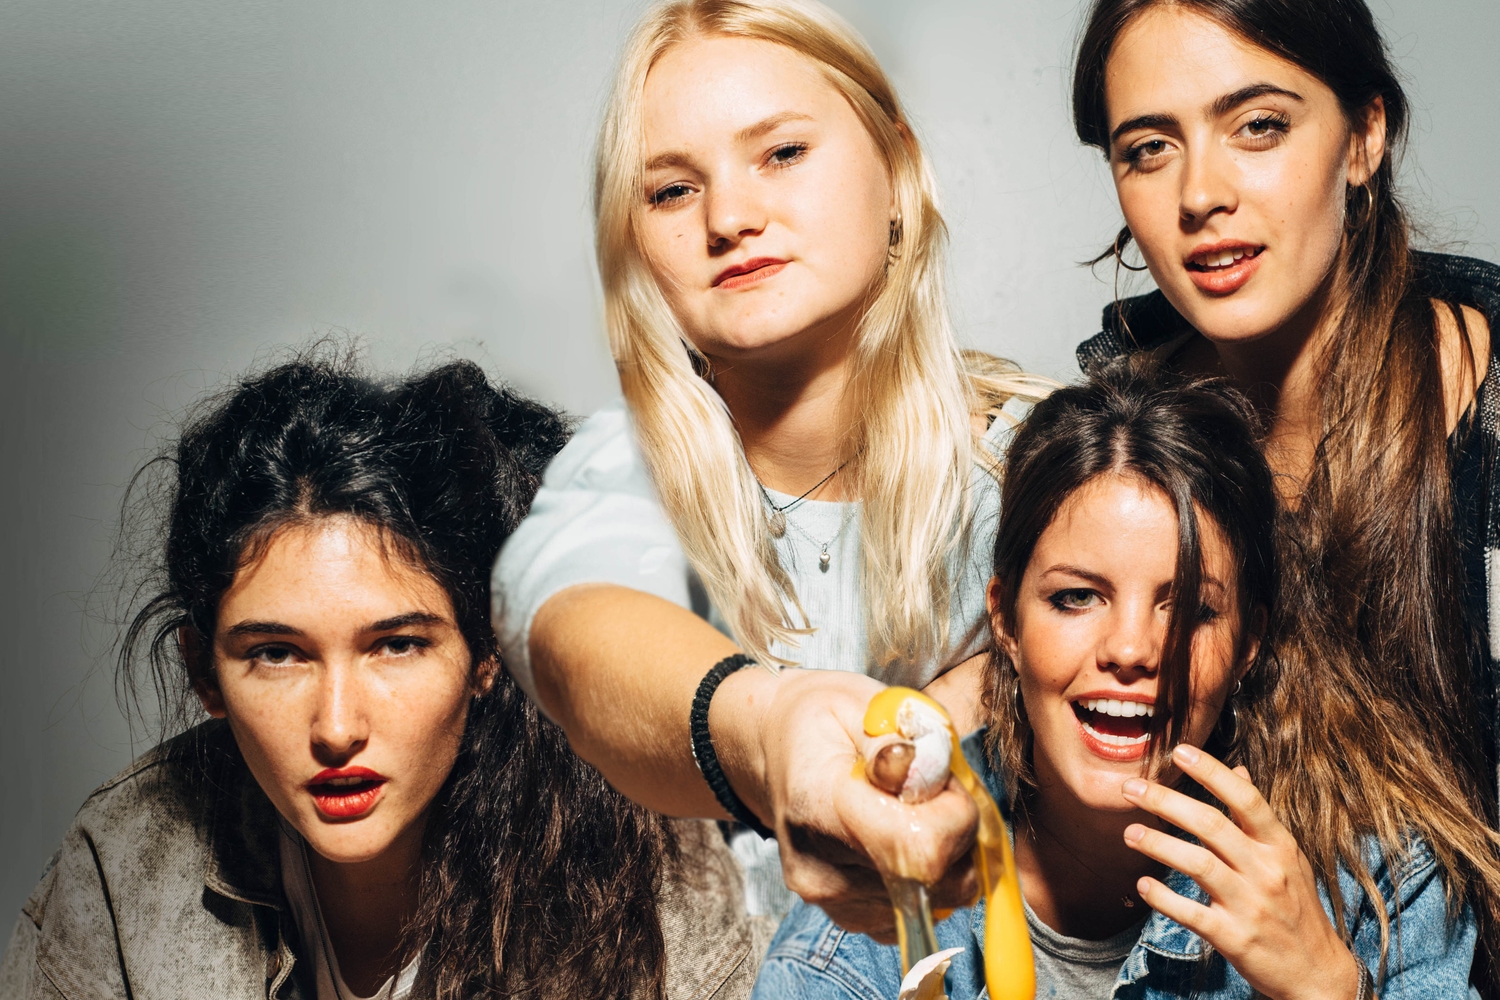 Hinds, Speedy Ortiz, Porches and more sign up for ‘Cover Your Ass’ compilation for Planned Parenthood